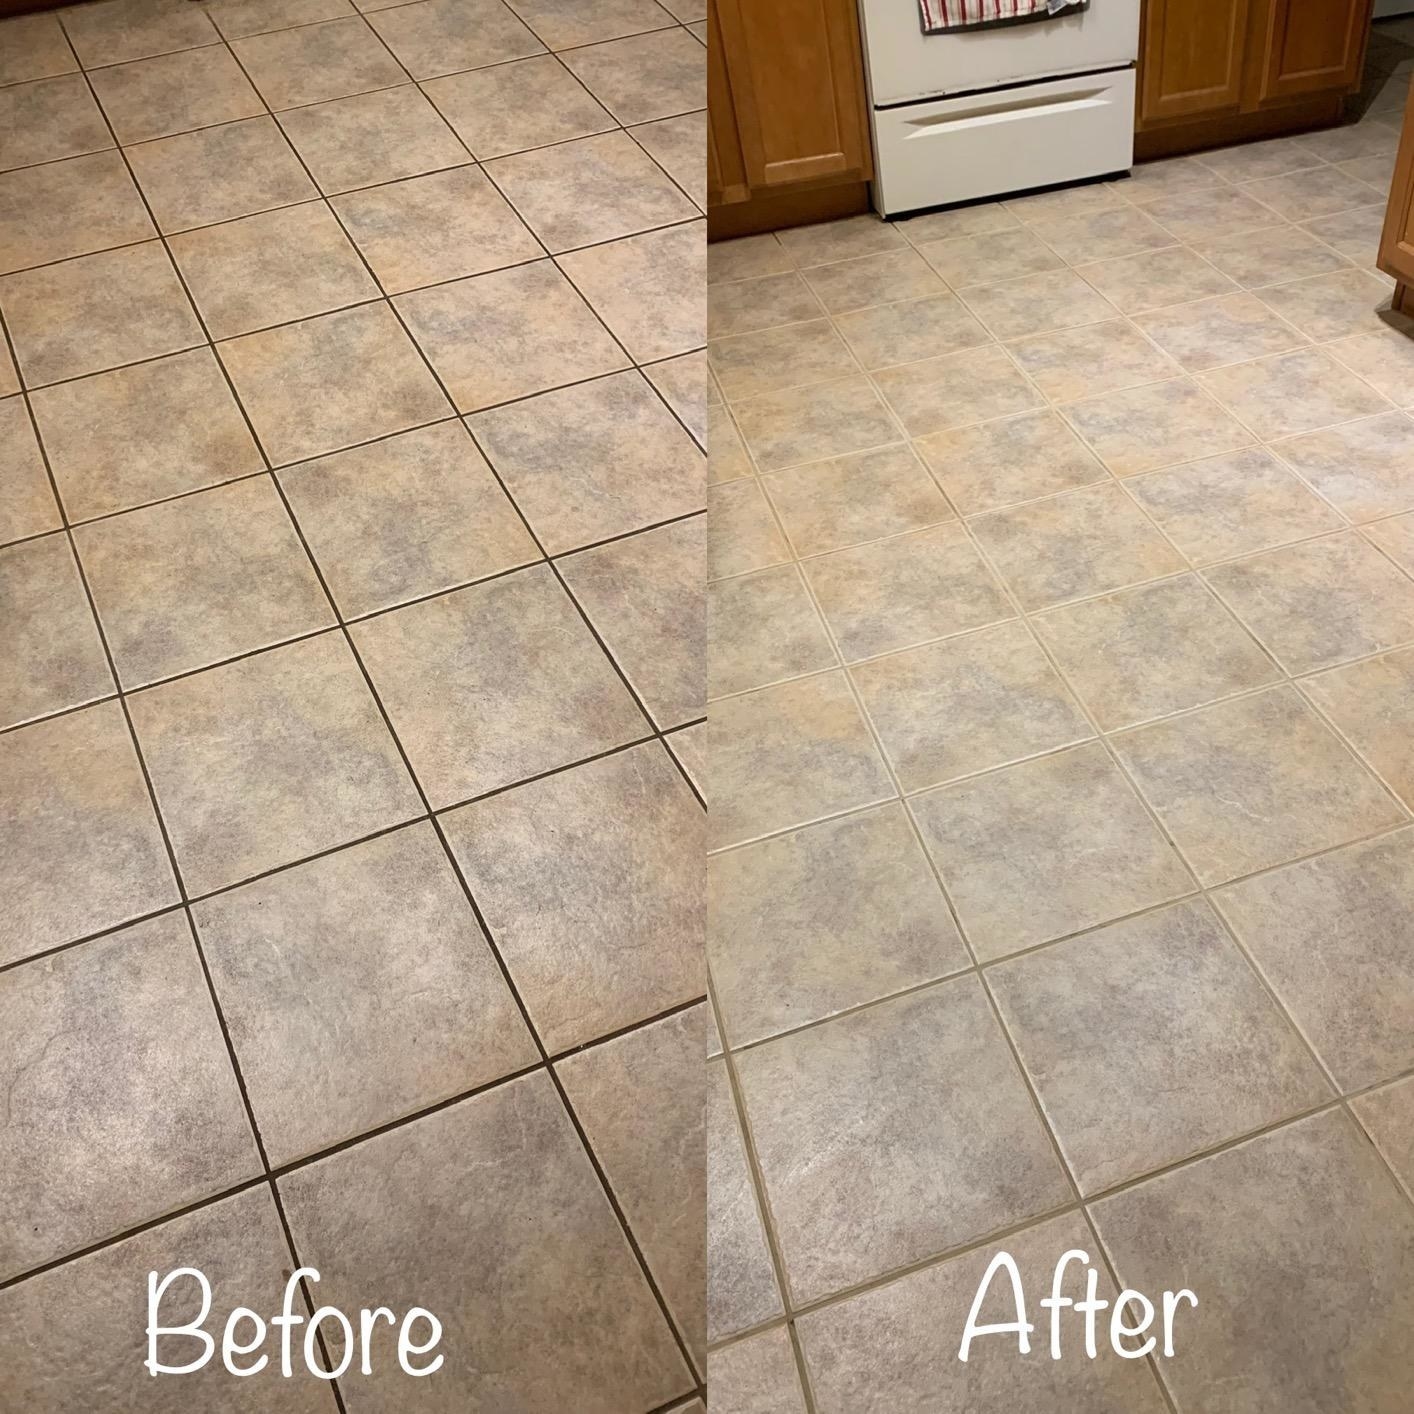 Reviewer before-and-after photos showing dark grout restore to its original color after treating with the cleaner